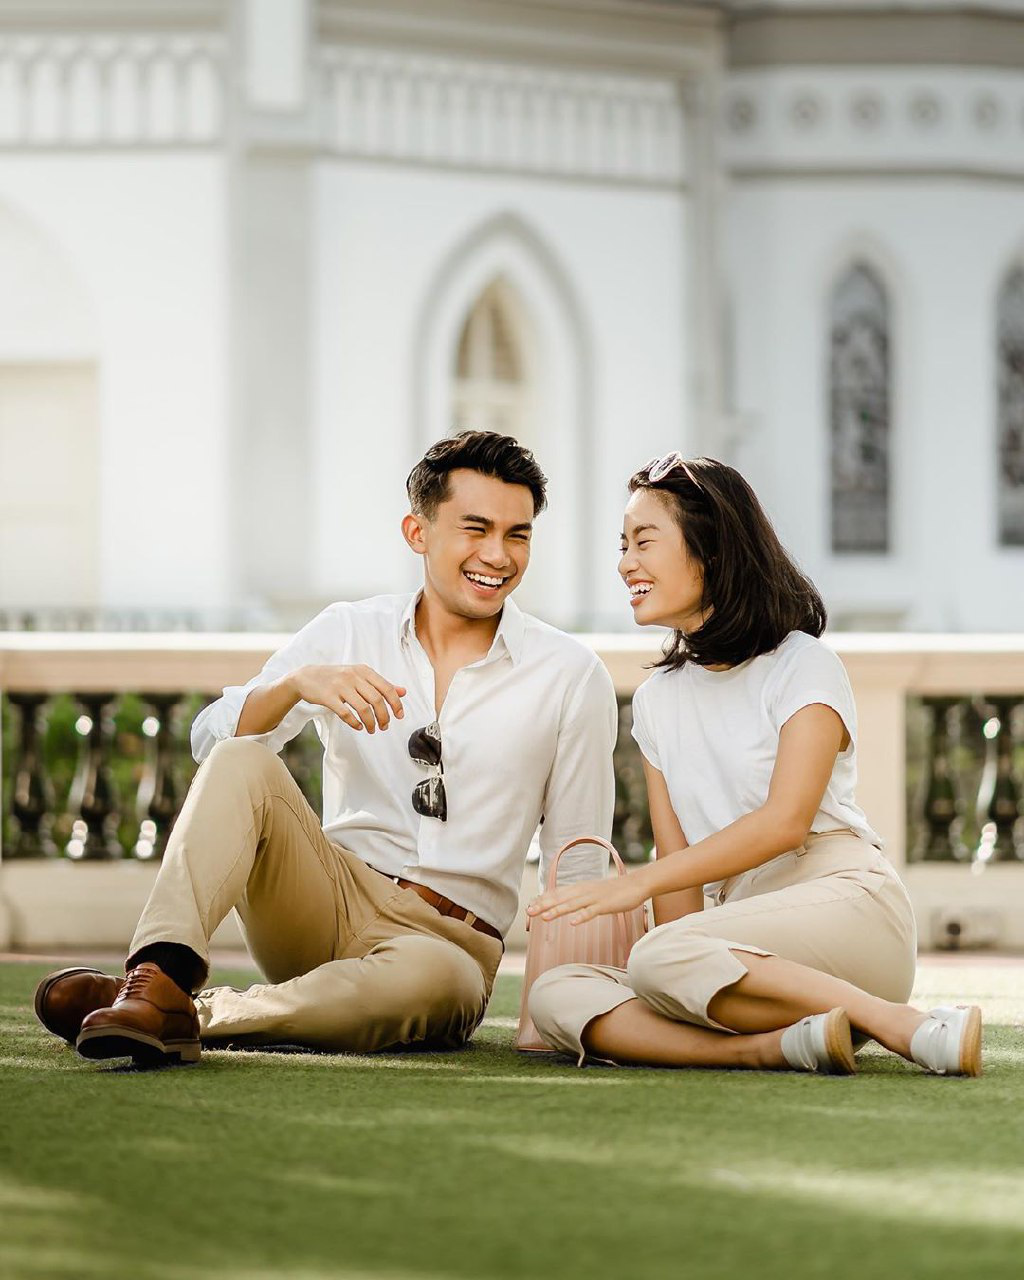 couple having a picnic together on a lawn CHIJMES